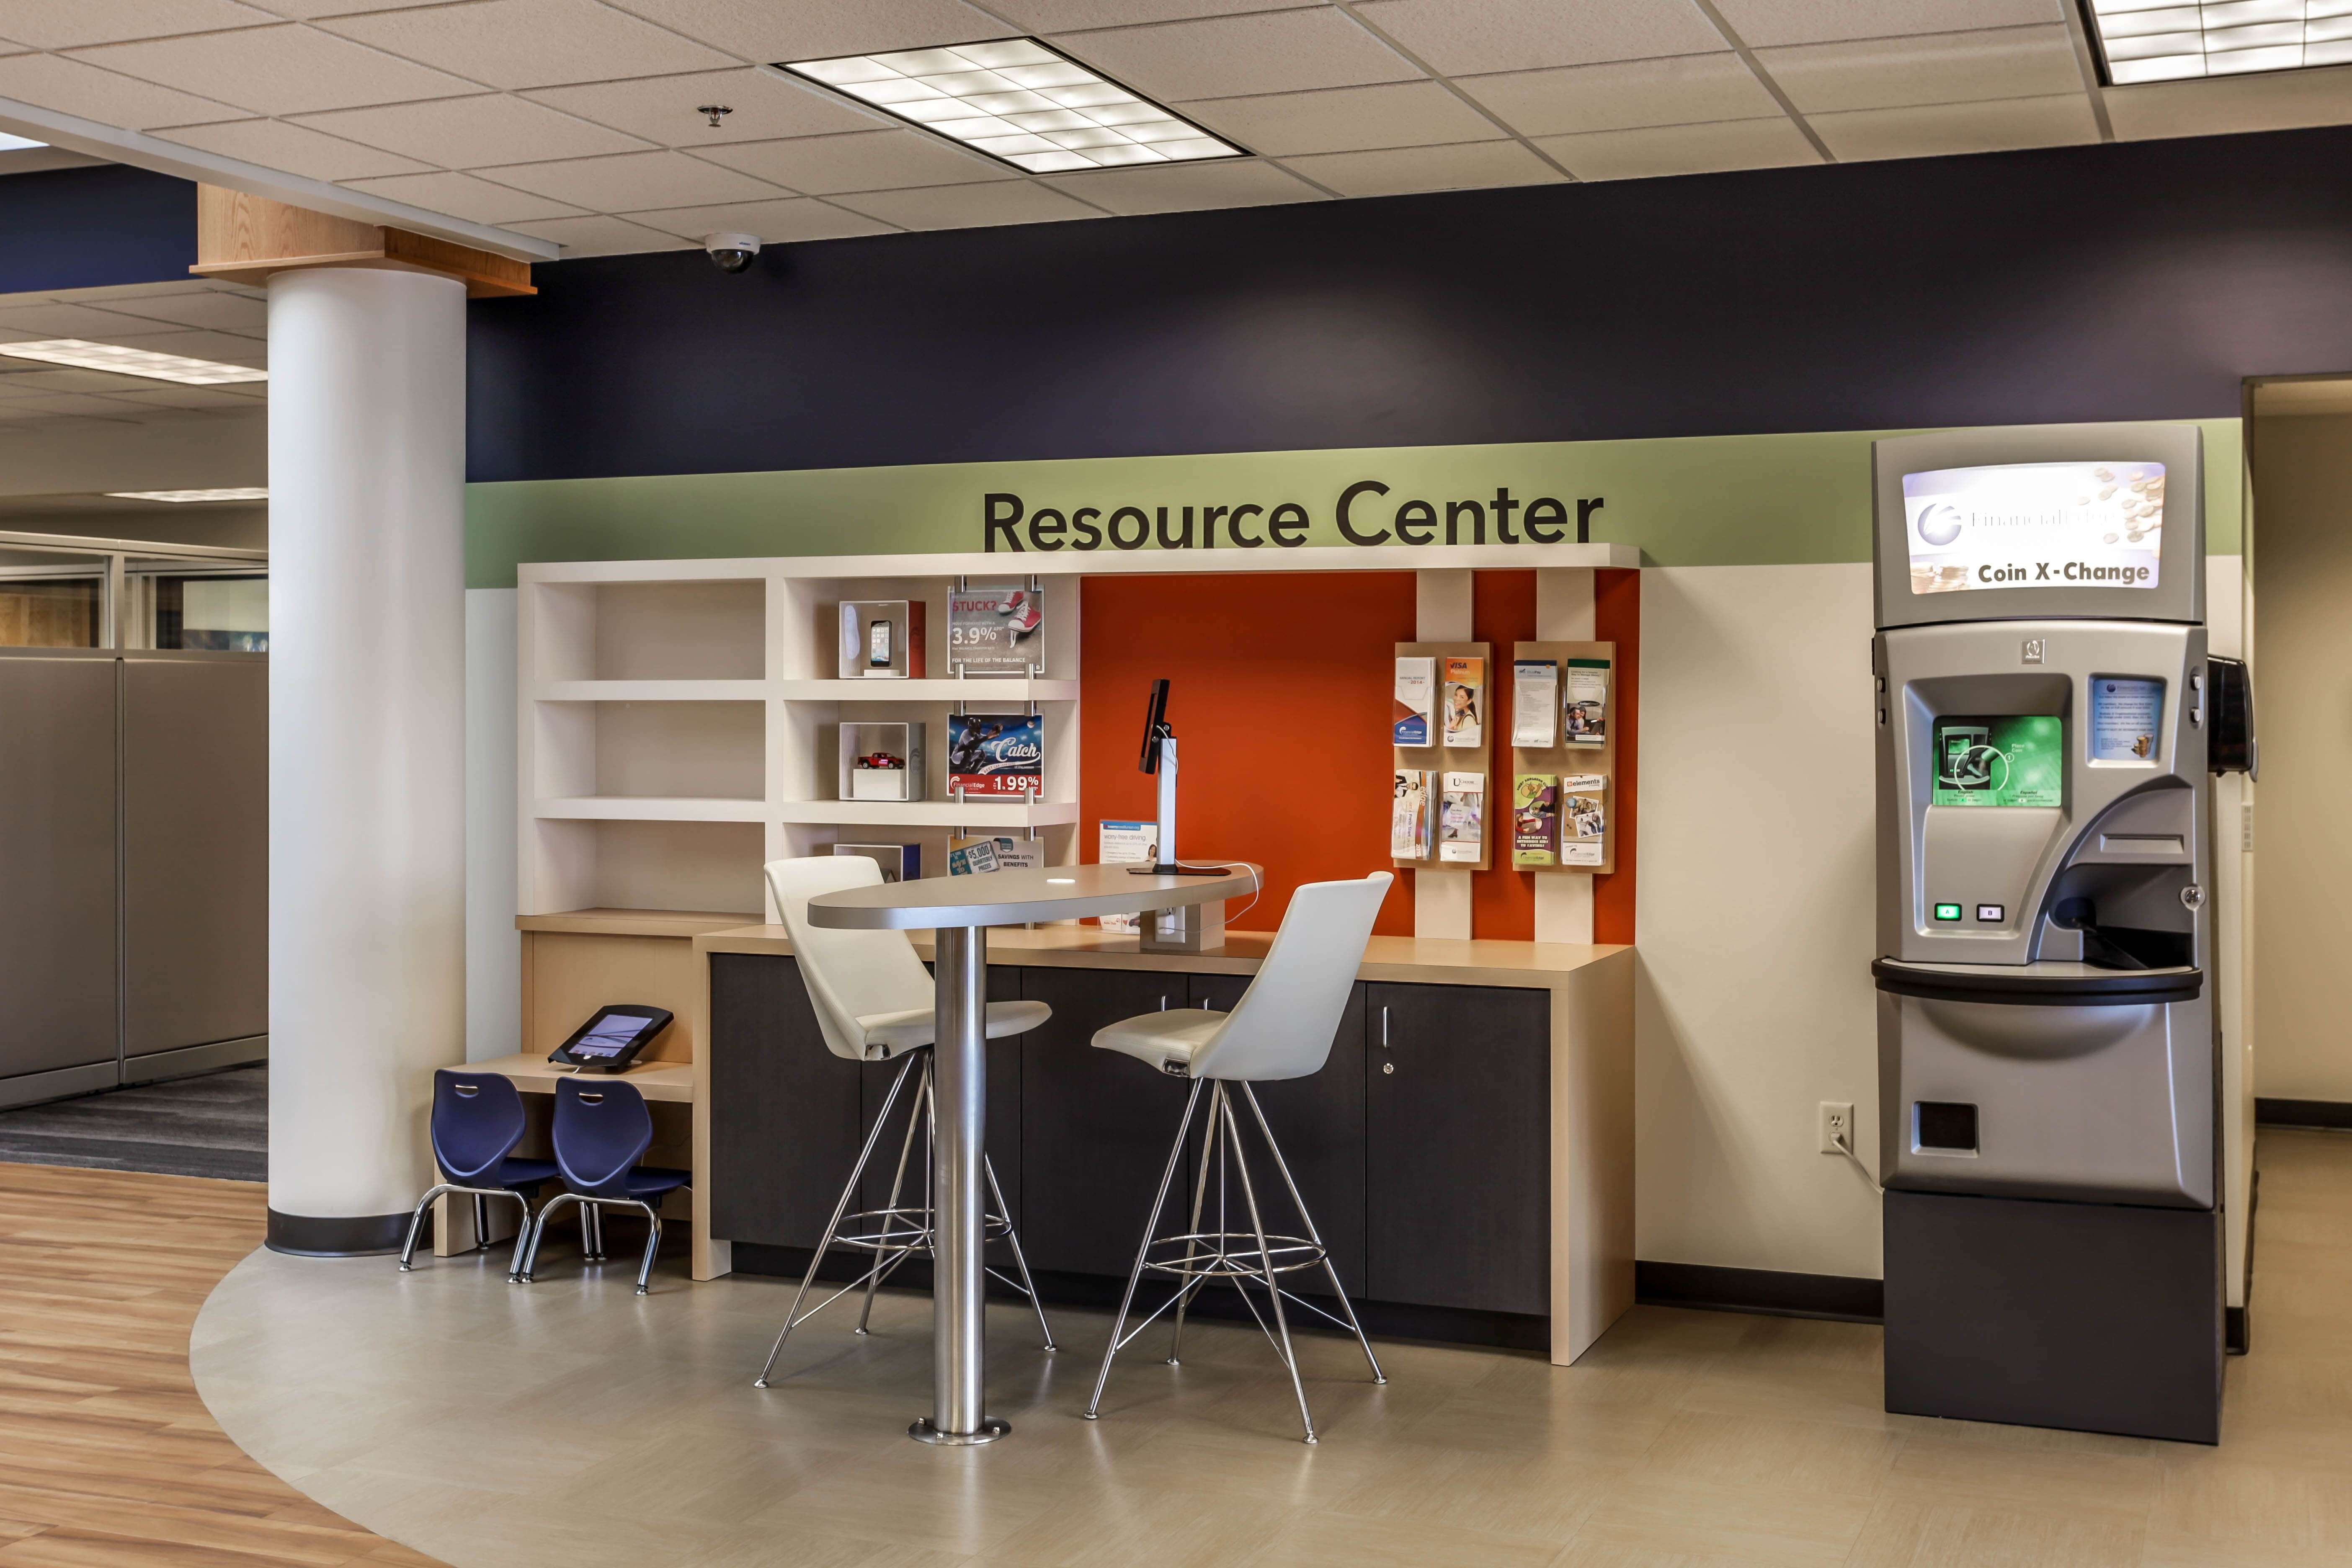 Member resource center in a credit union